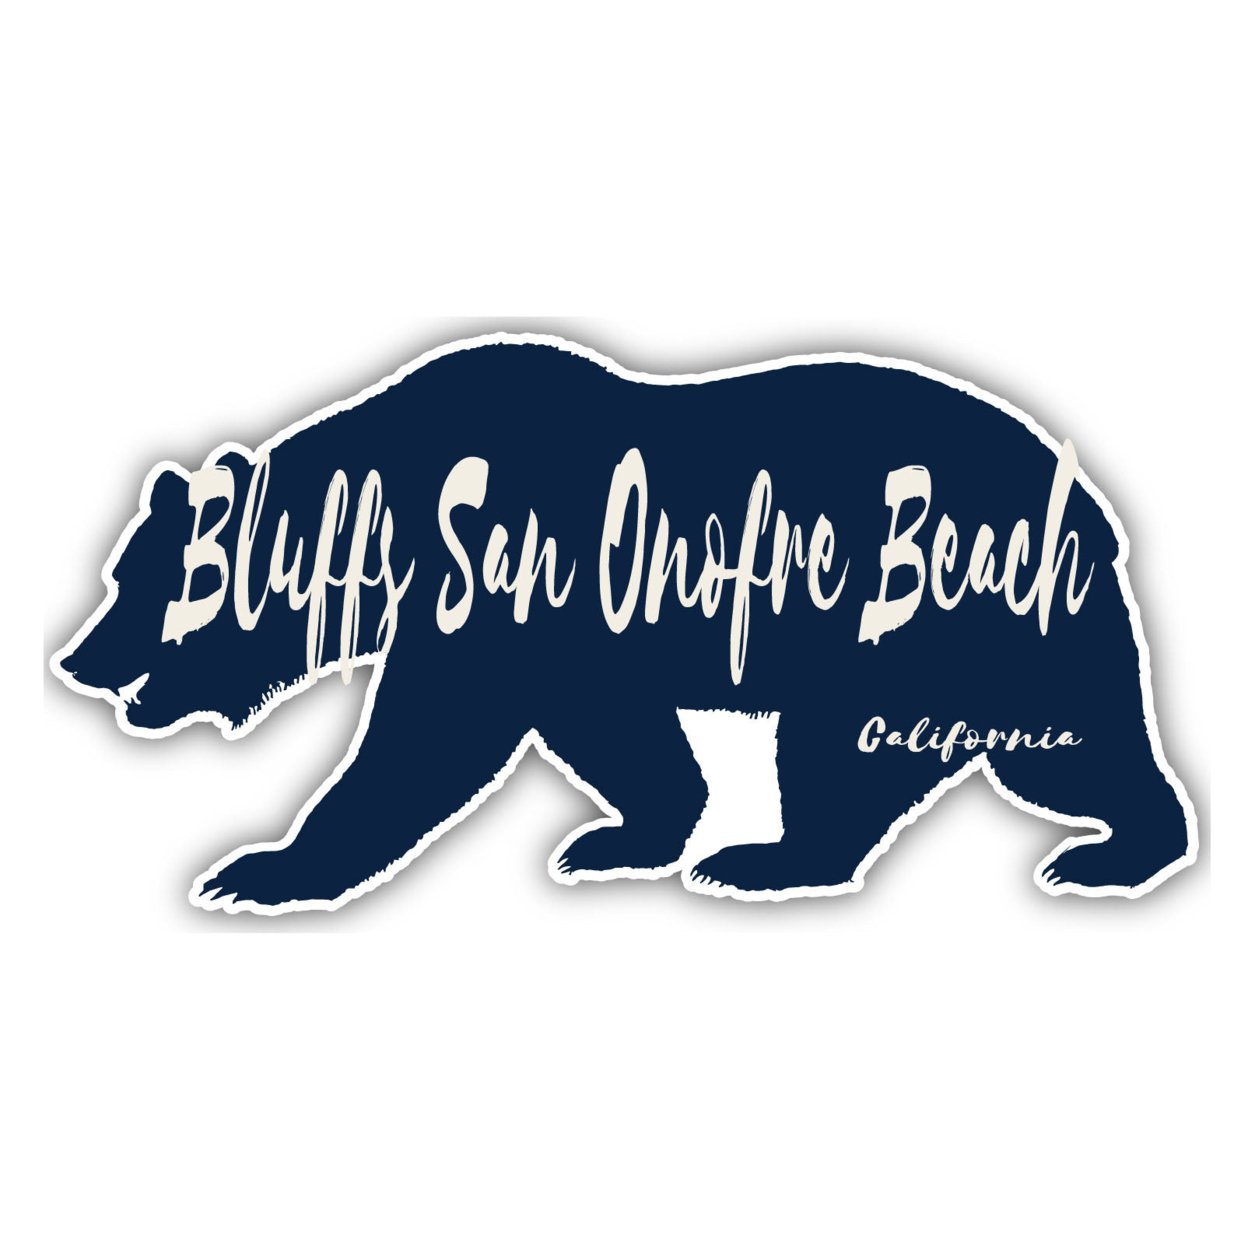 Bluffs San Onofre Beach California Souvenir Decorative Stickers (Choose Theme And Size) - 4-Pack, 4-Inch, Bear